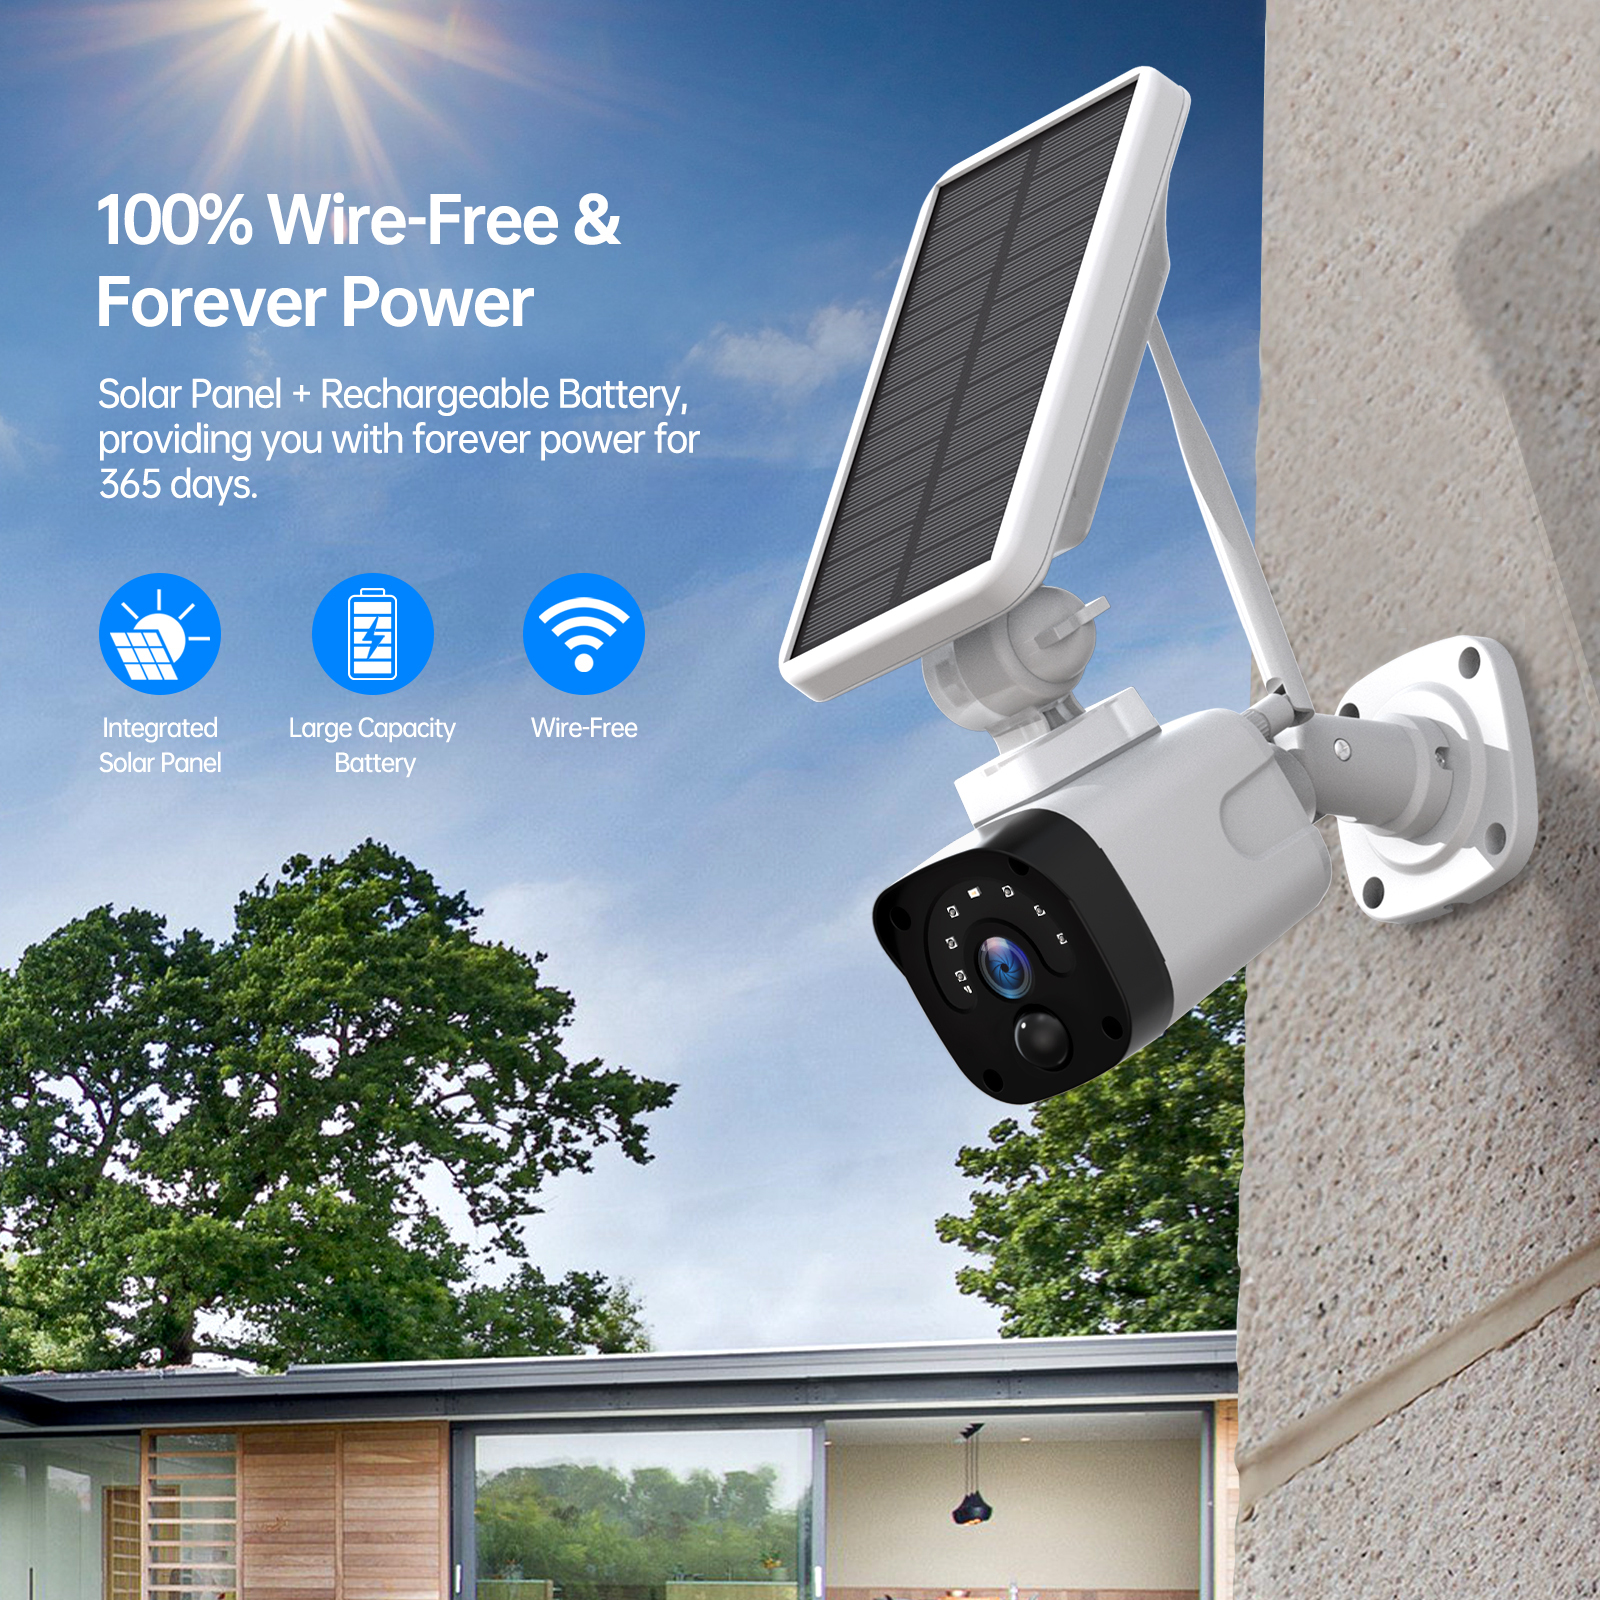 Toguard SC04A Solar Wireless Security Camera System Outdoor Battery WiFi Bullet Surveillance Camera Wireless Connector - image 3 of 9